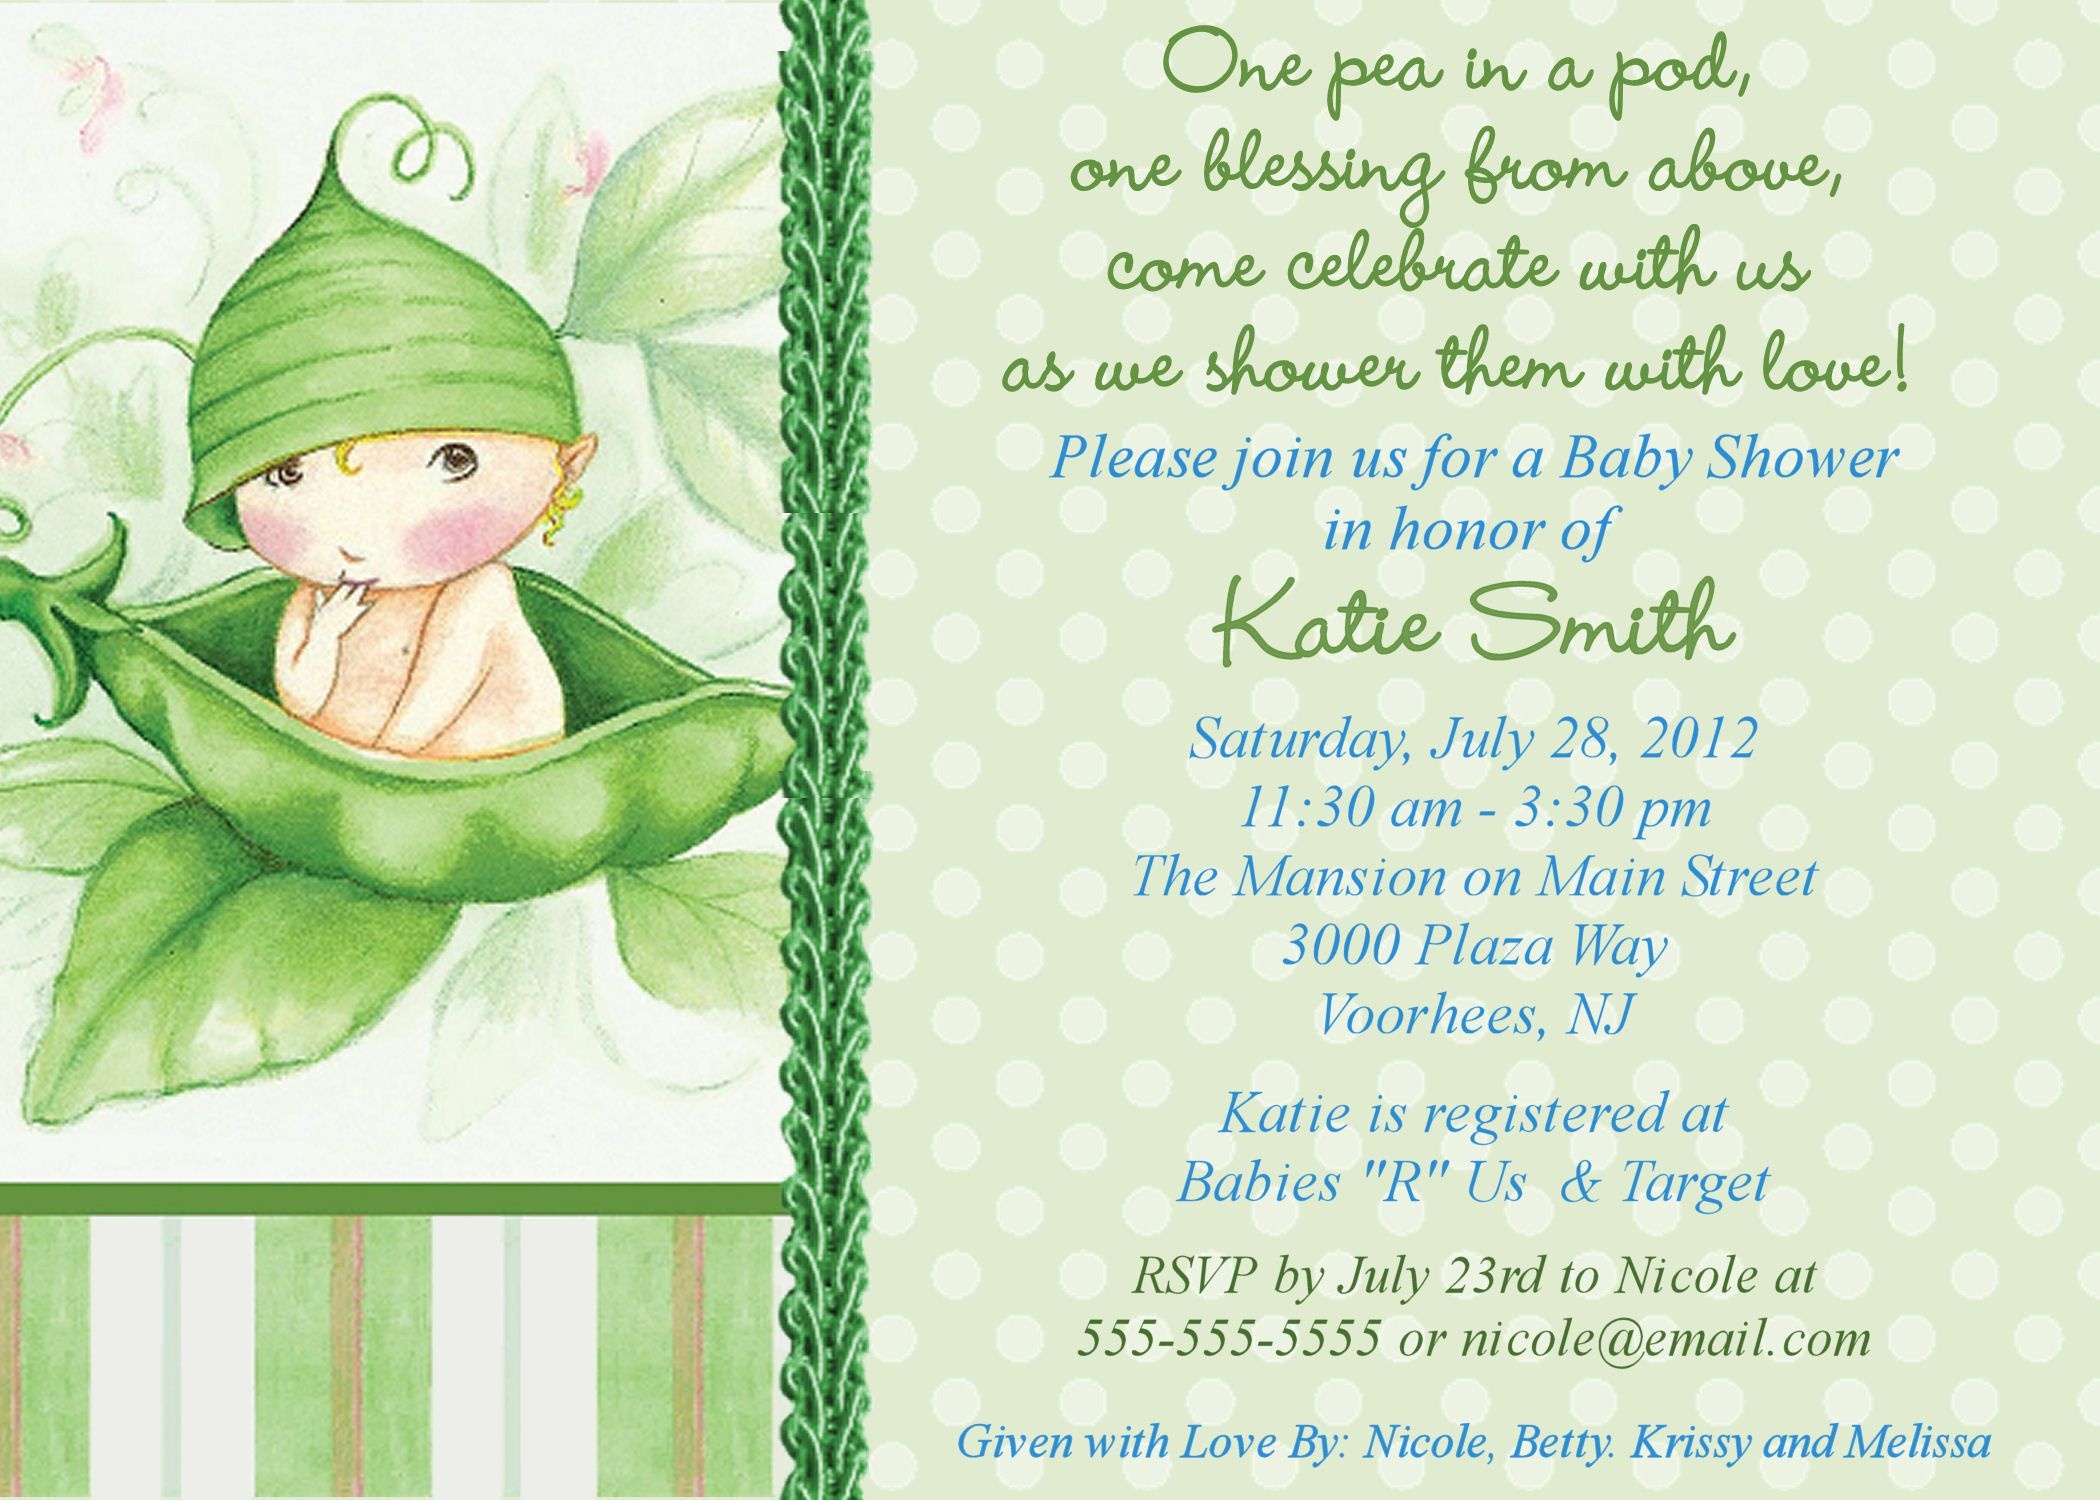 Image For Baby Shower Invitations Online Free Printable - Baby Shower Cards Online Free Printable